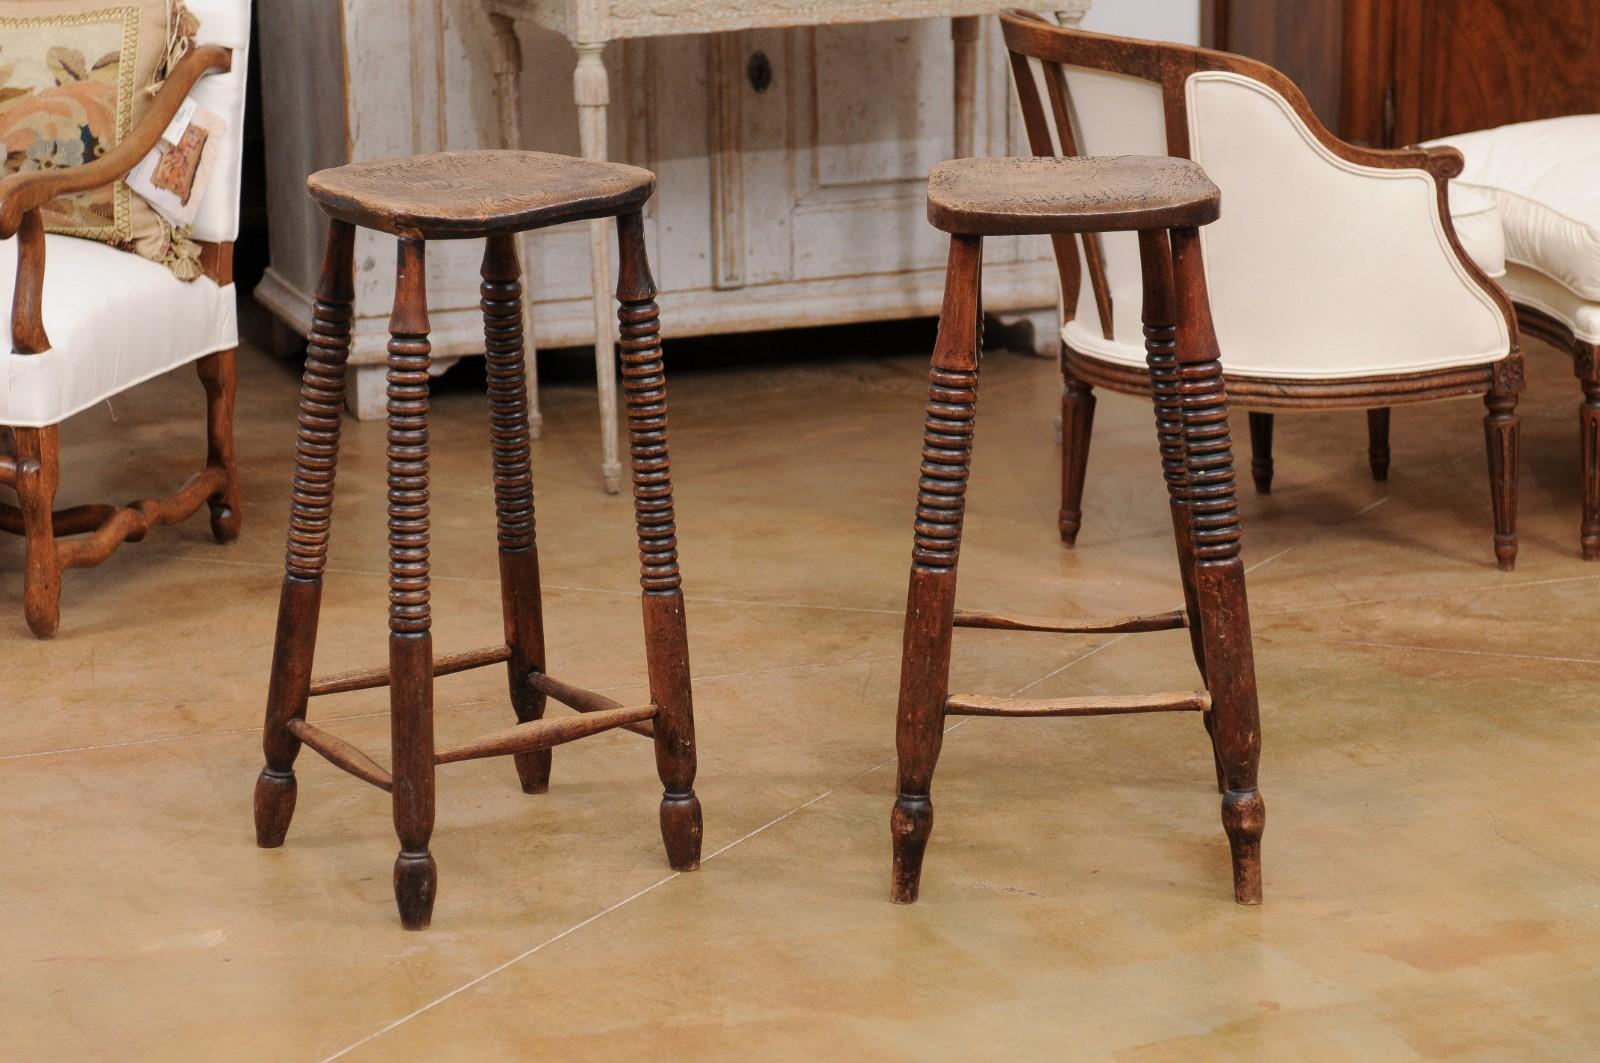 A pair of rustic French wooden bar stools from the late 19th century, with spool legs and weathered patina. Created in France during the third quarter of the 19th century, each of this pair of bar stools features a nicely aged square top sitting